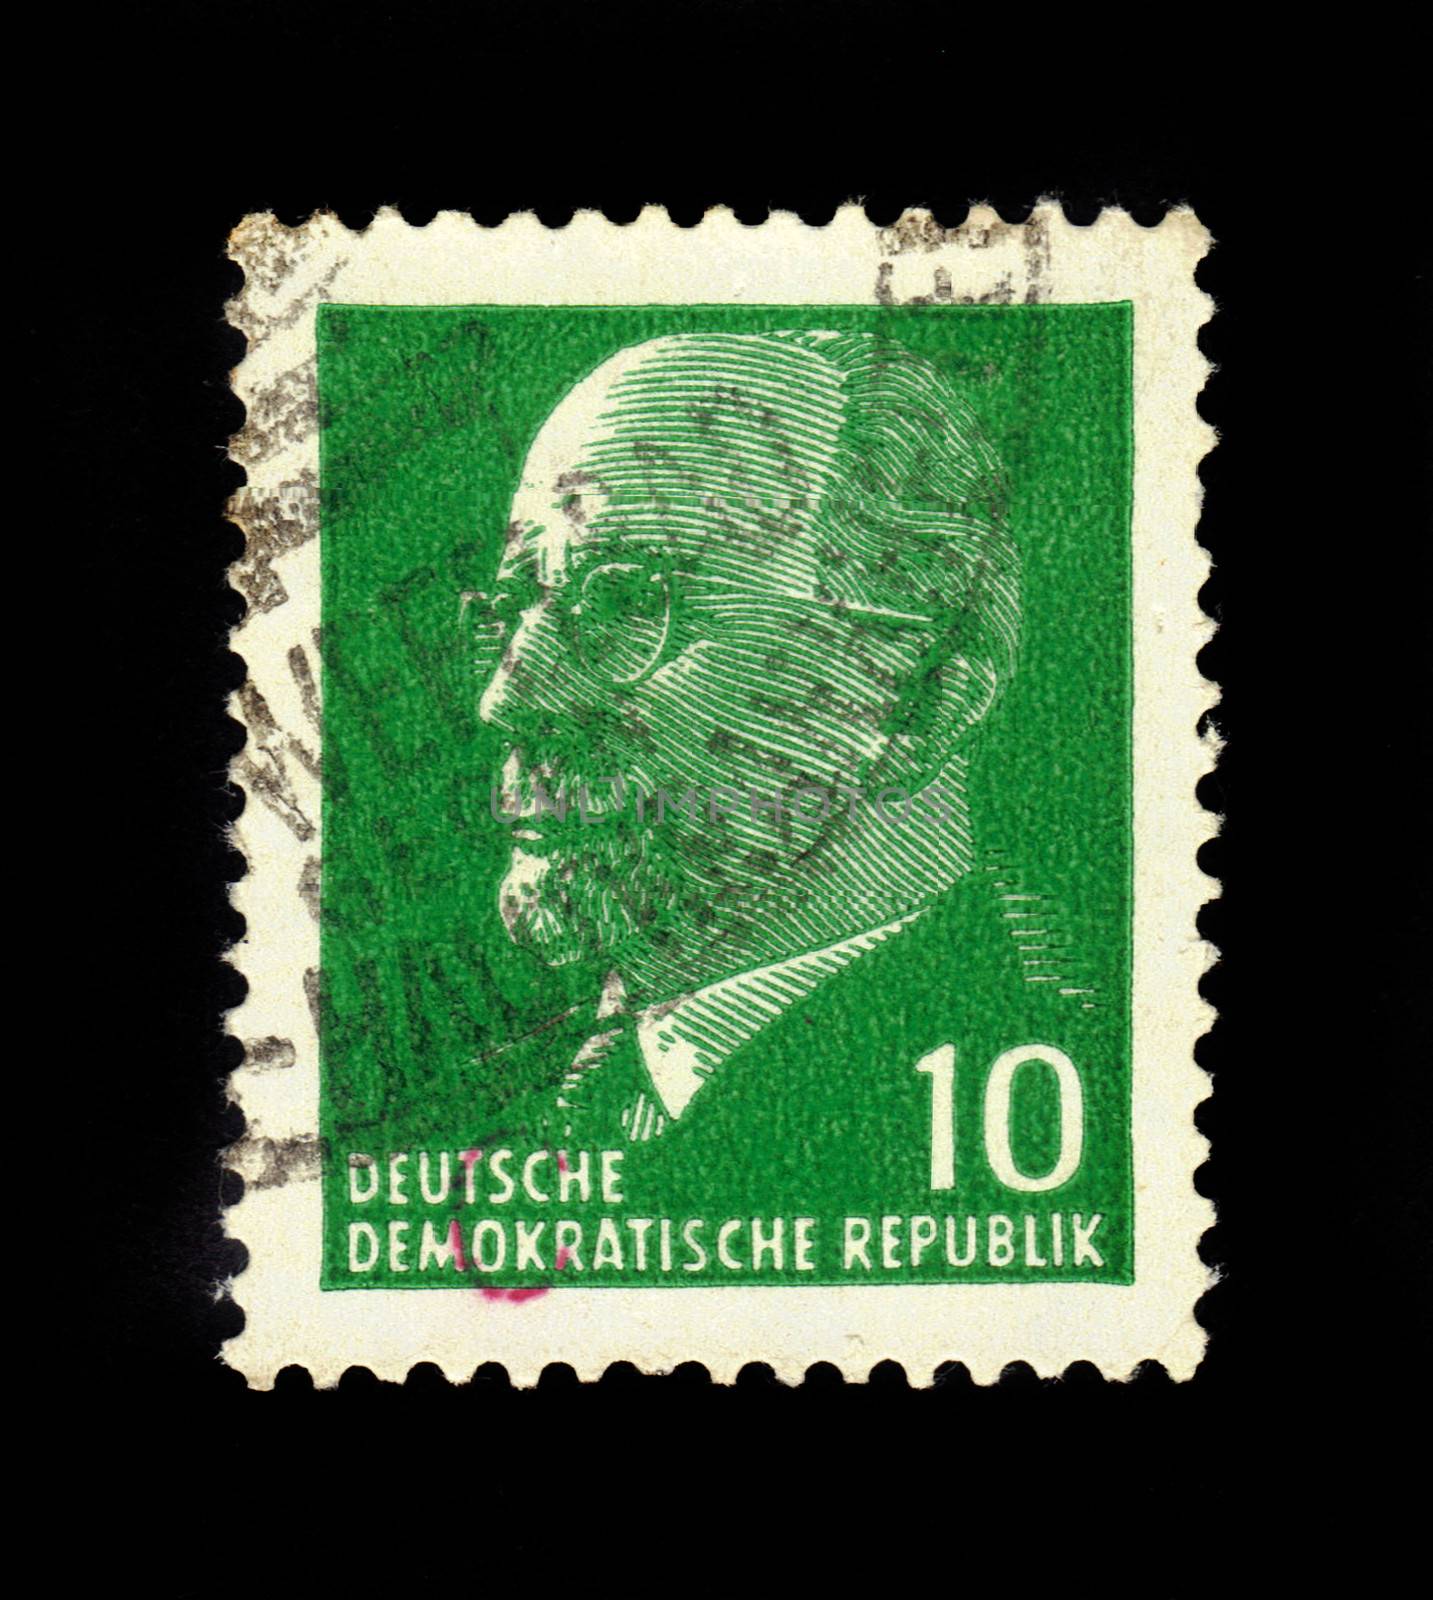 GDR - CIRCA 1961: A Stamp printed in GDR (East Germany) shows portraits of Walter Ulbricht (1893-1973) - first Chairman of the GDR State Council, series "Walter Ulbricht", circa 1961